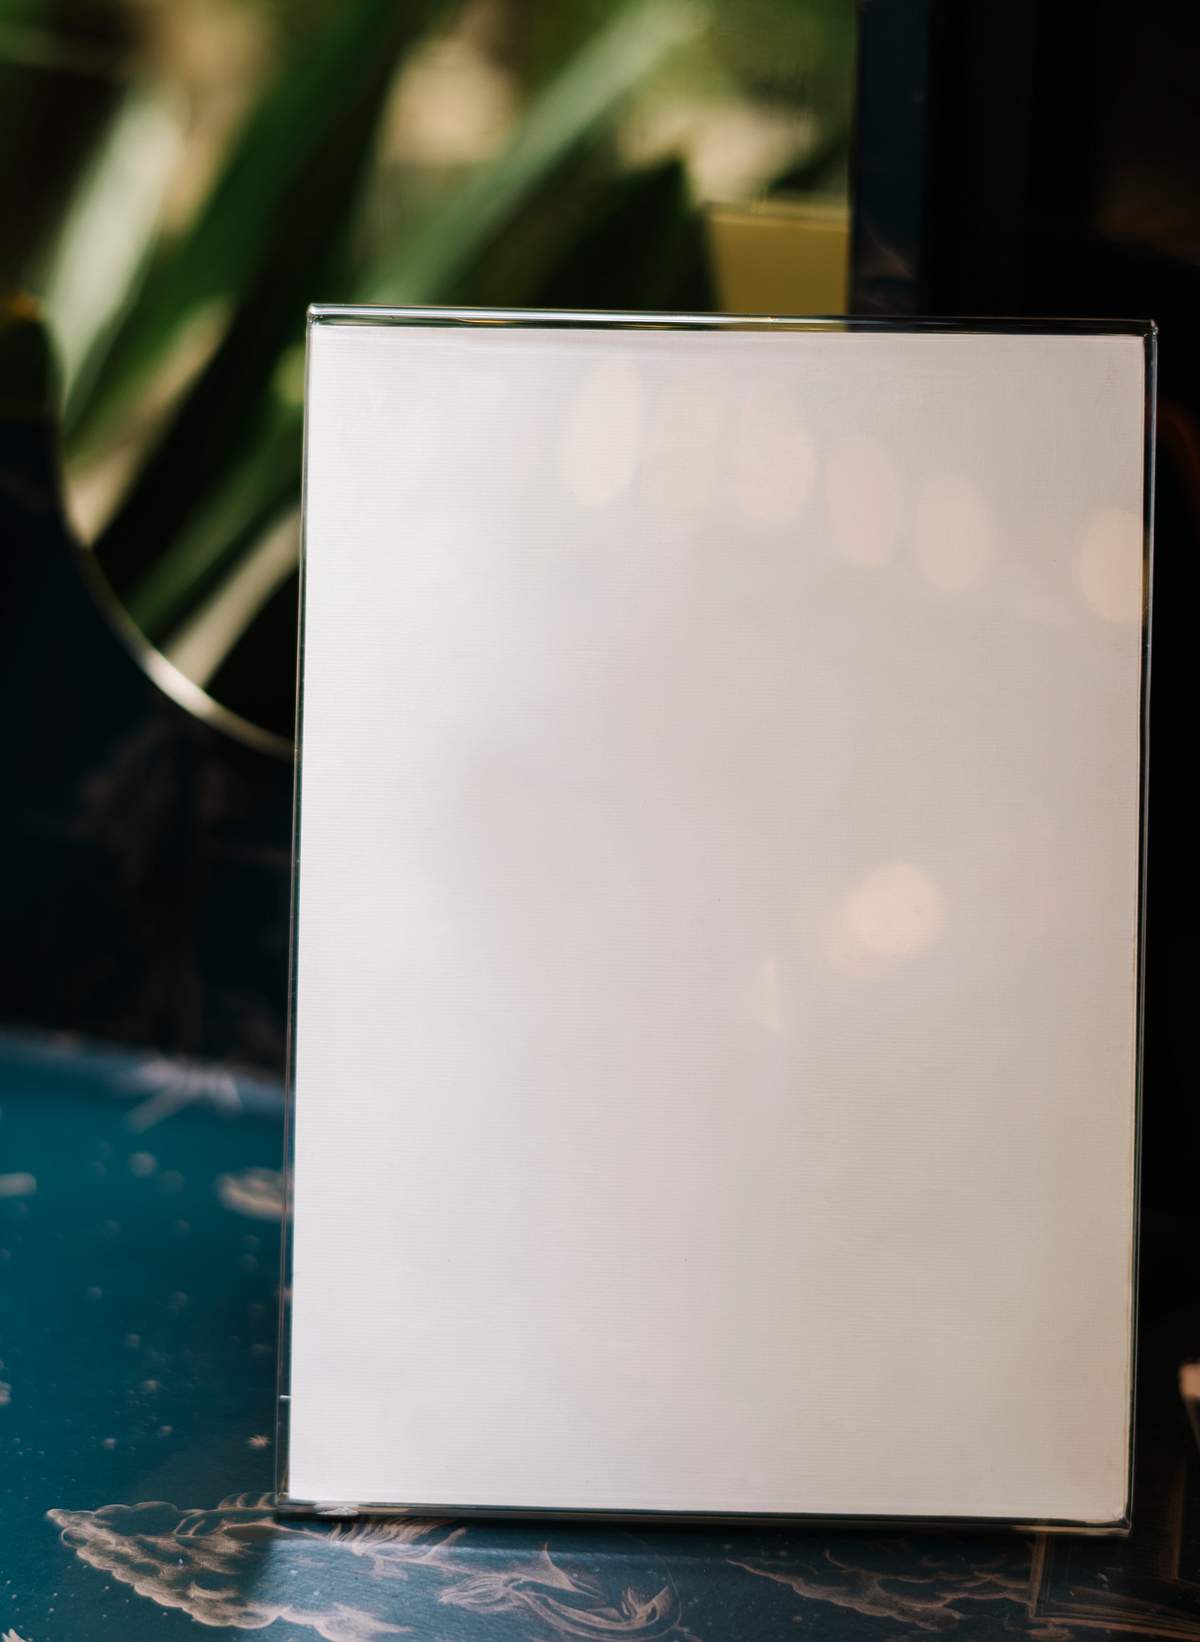 Download White A4 Placard Mockup Inside Of An Acrylic Free Stock Photo High Resolution Image